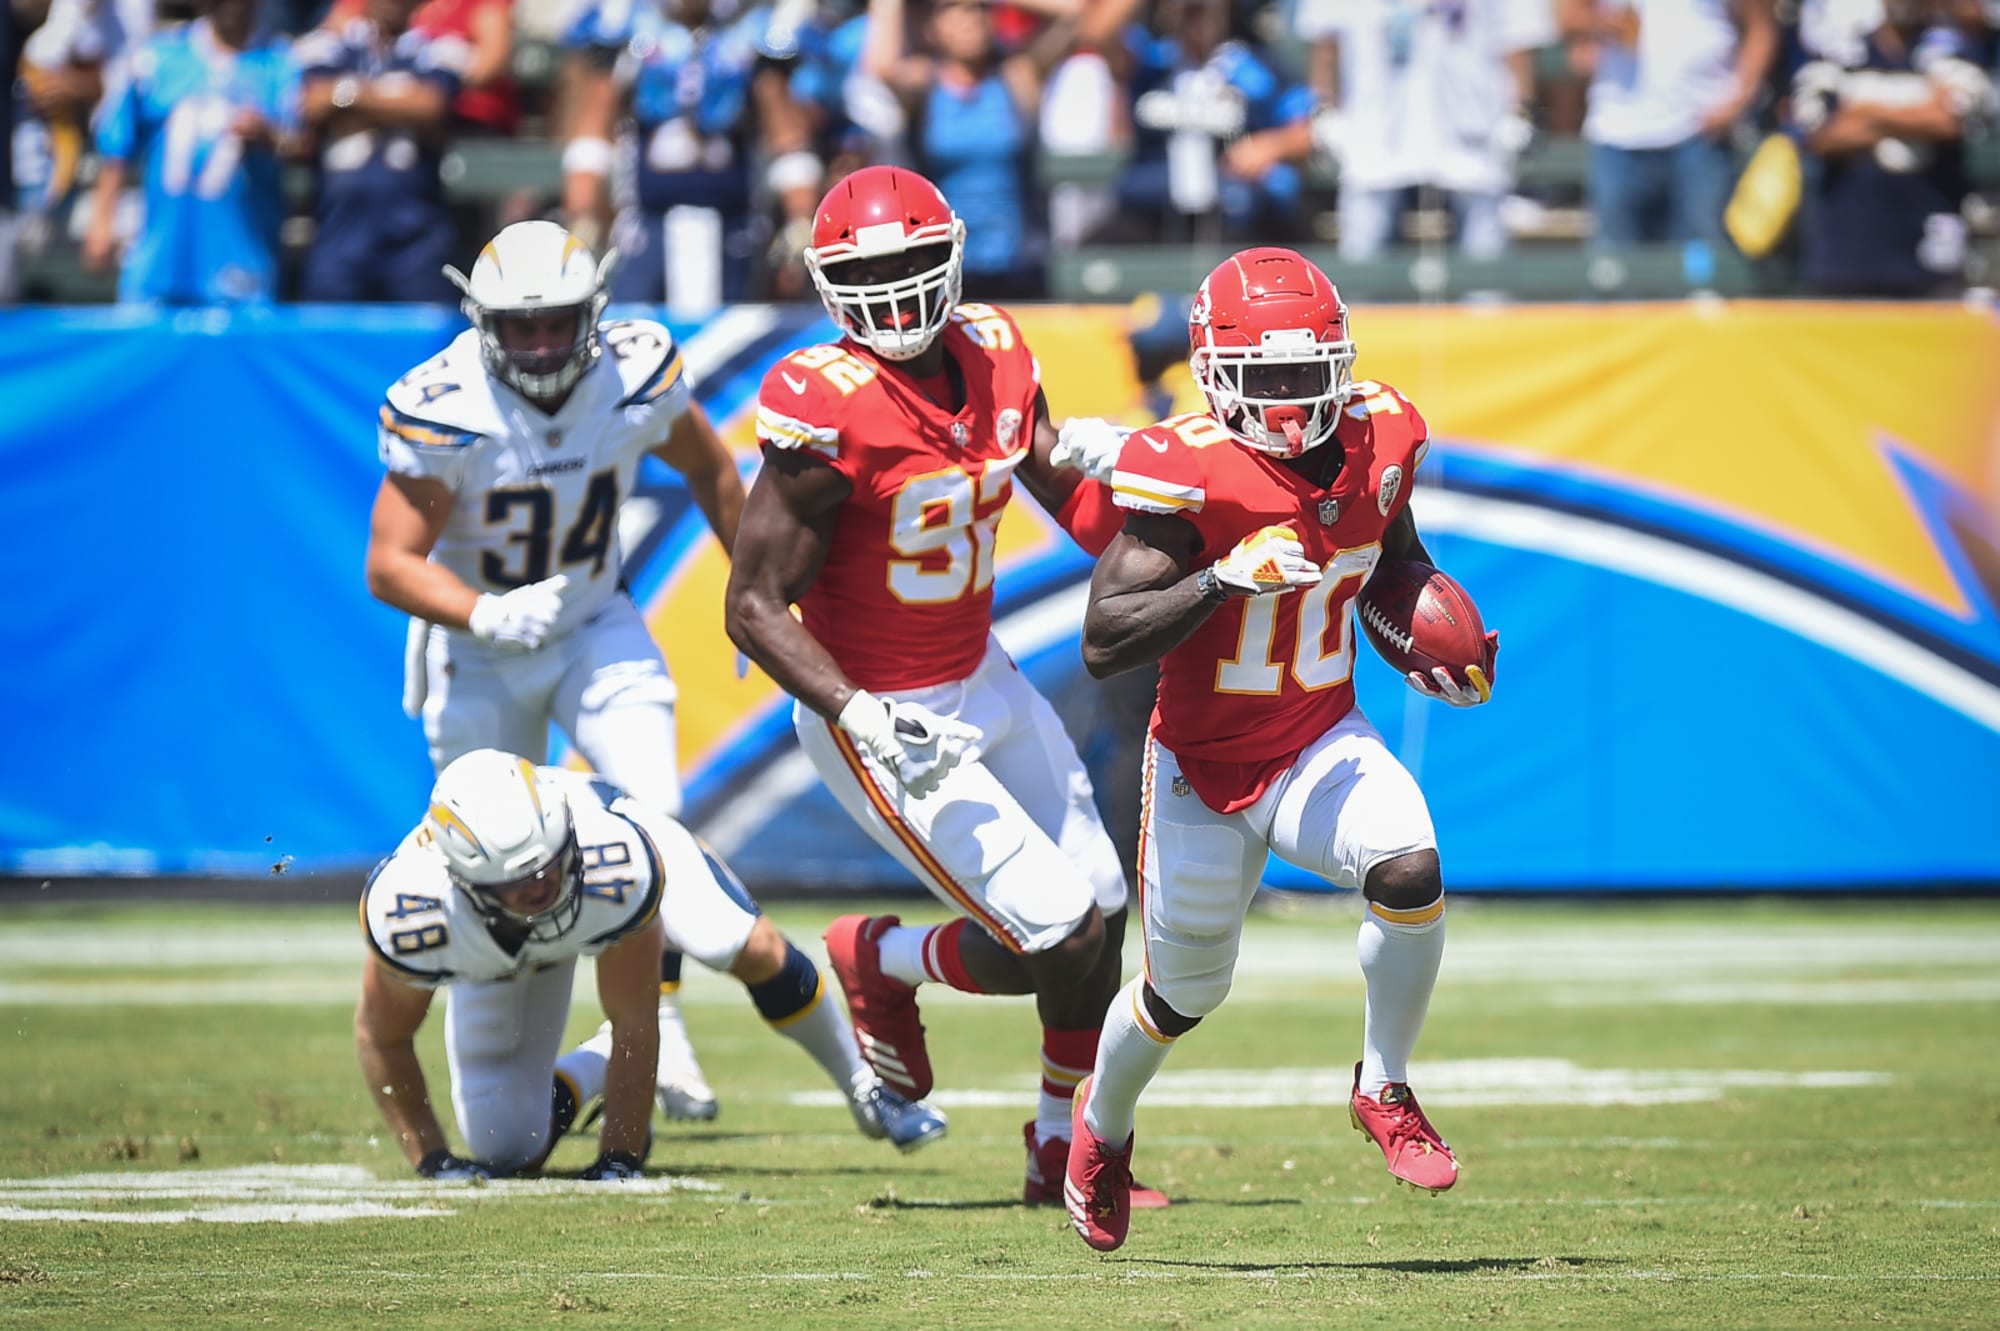 Chiefs vs. Chargers recap: Kansas City gets ninth straight win over Los